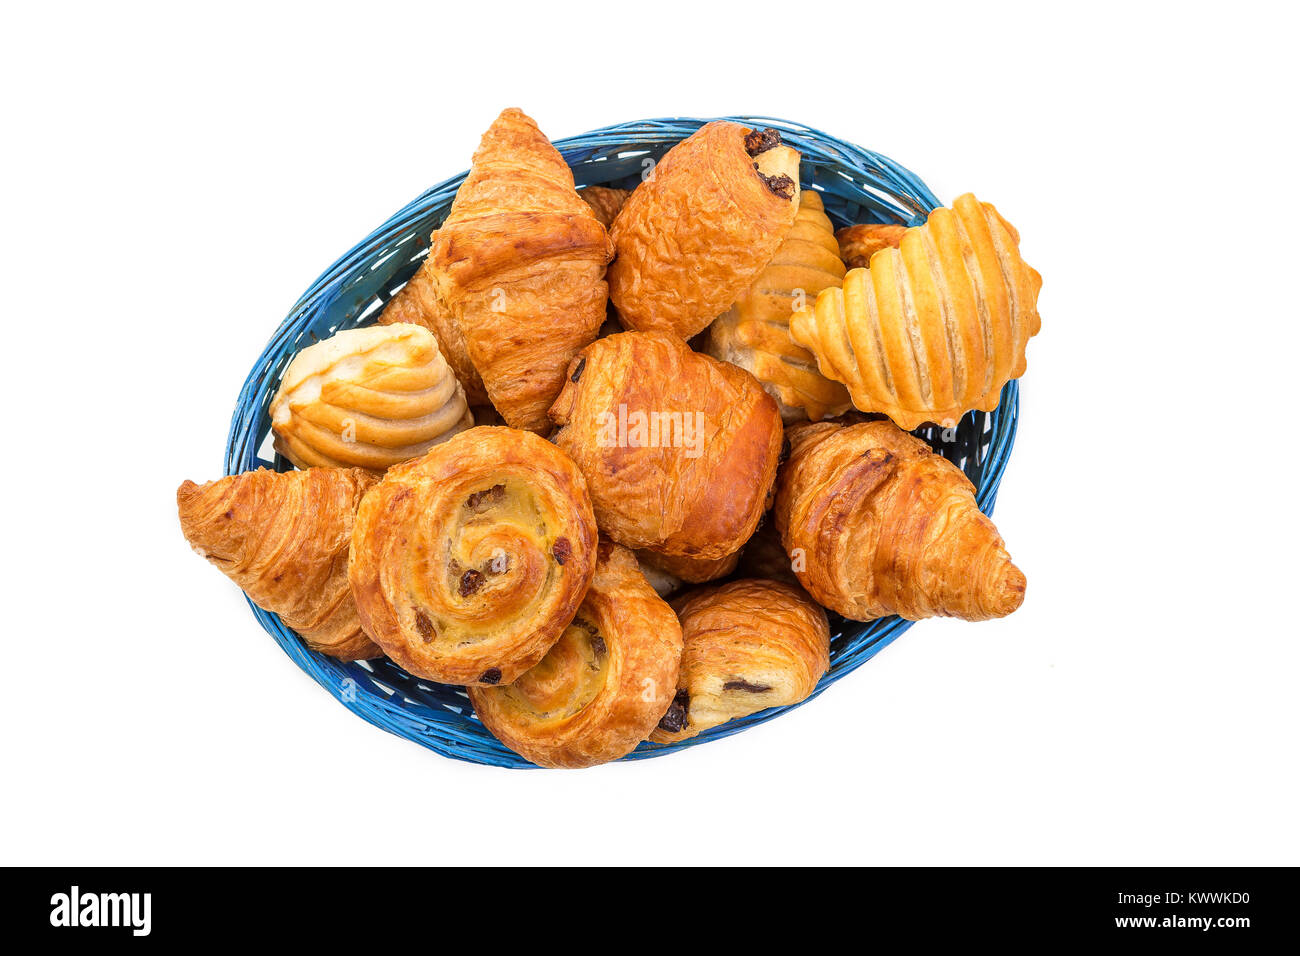 Close up Gourmet Buttery and Flaky pastries in Vienna Style on a Basket Top view with white Background. Stock Photo